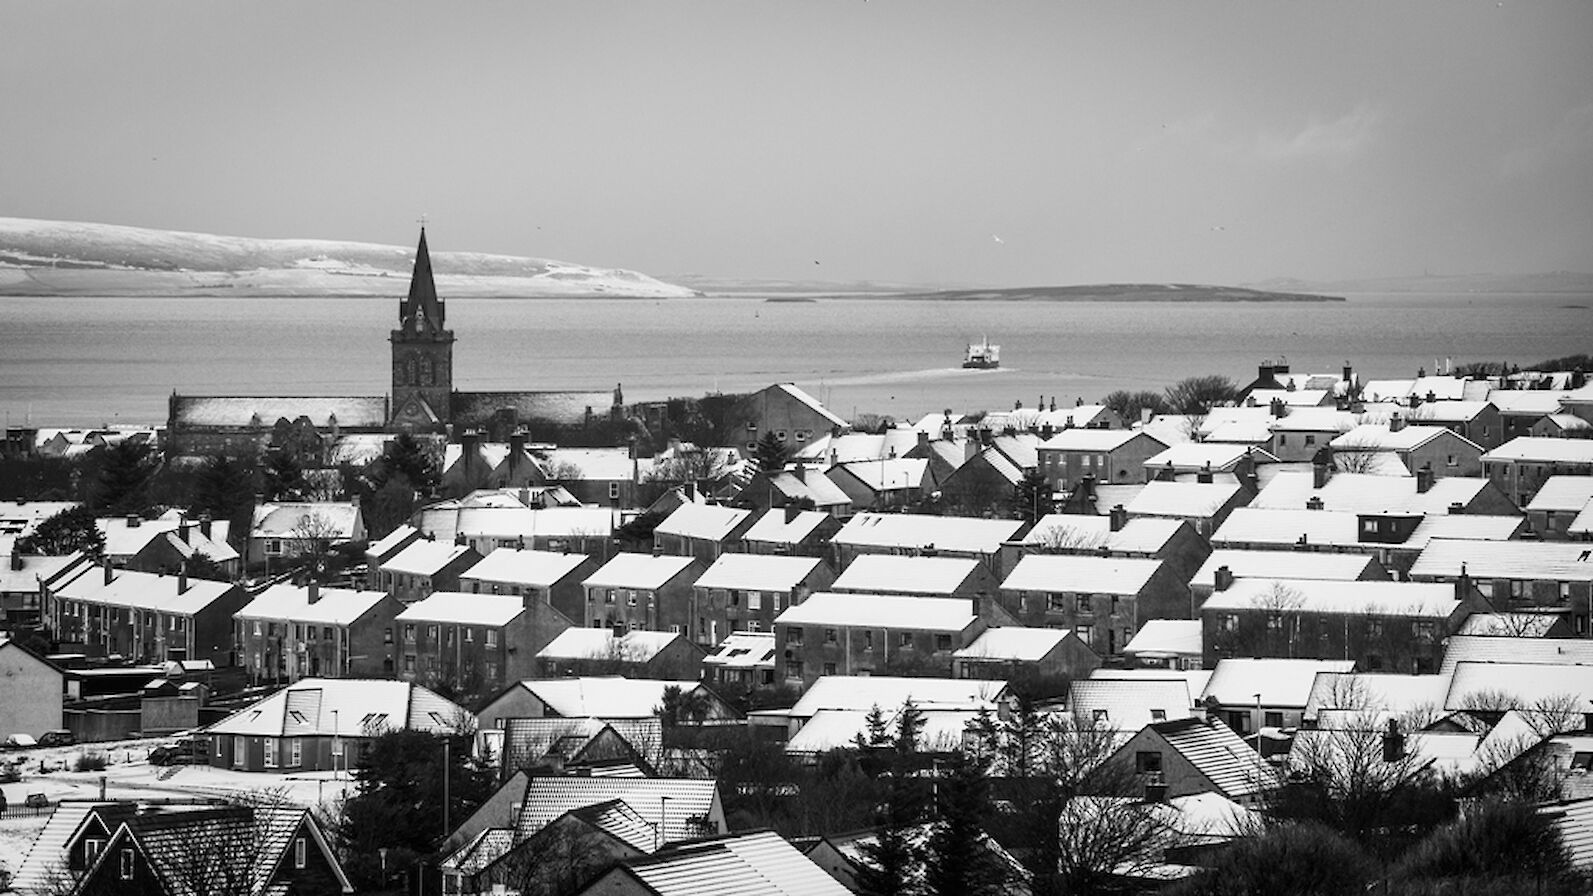 Snowy Kirkwall - image by James Grieve